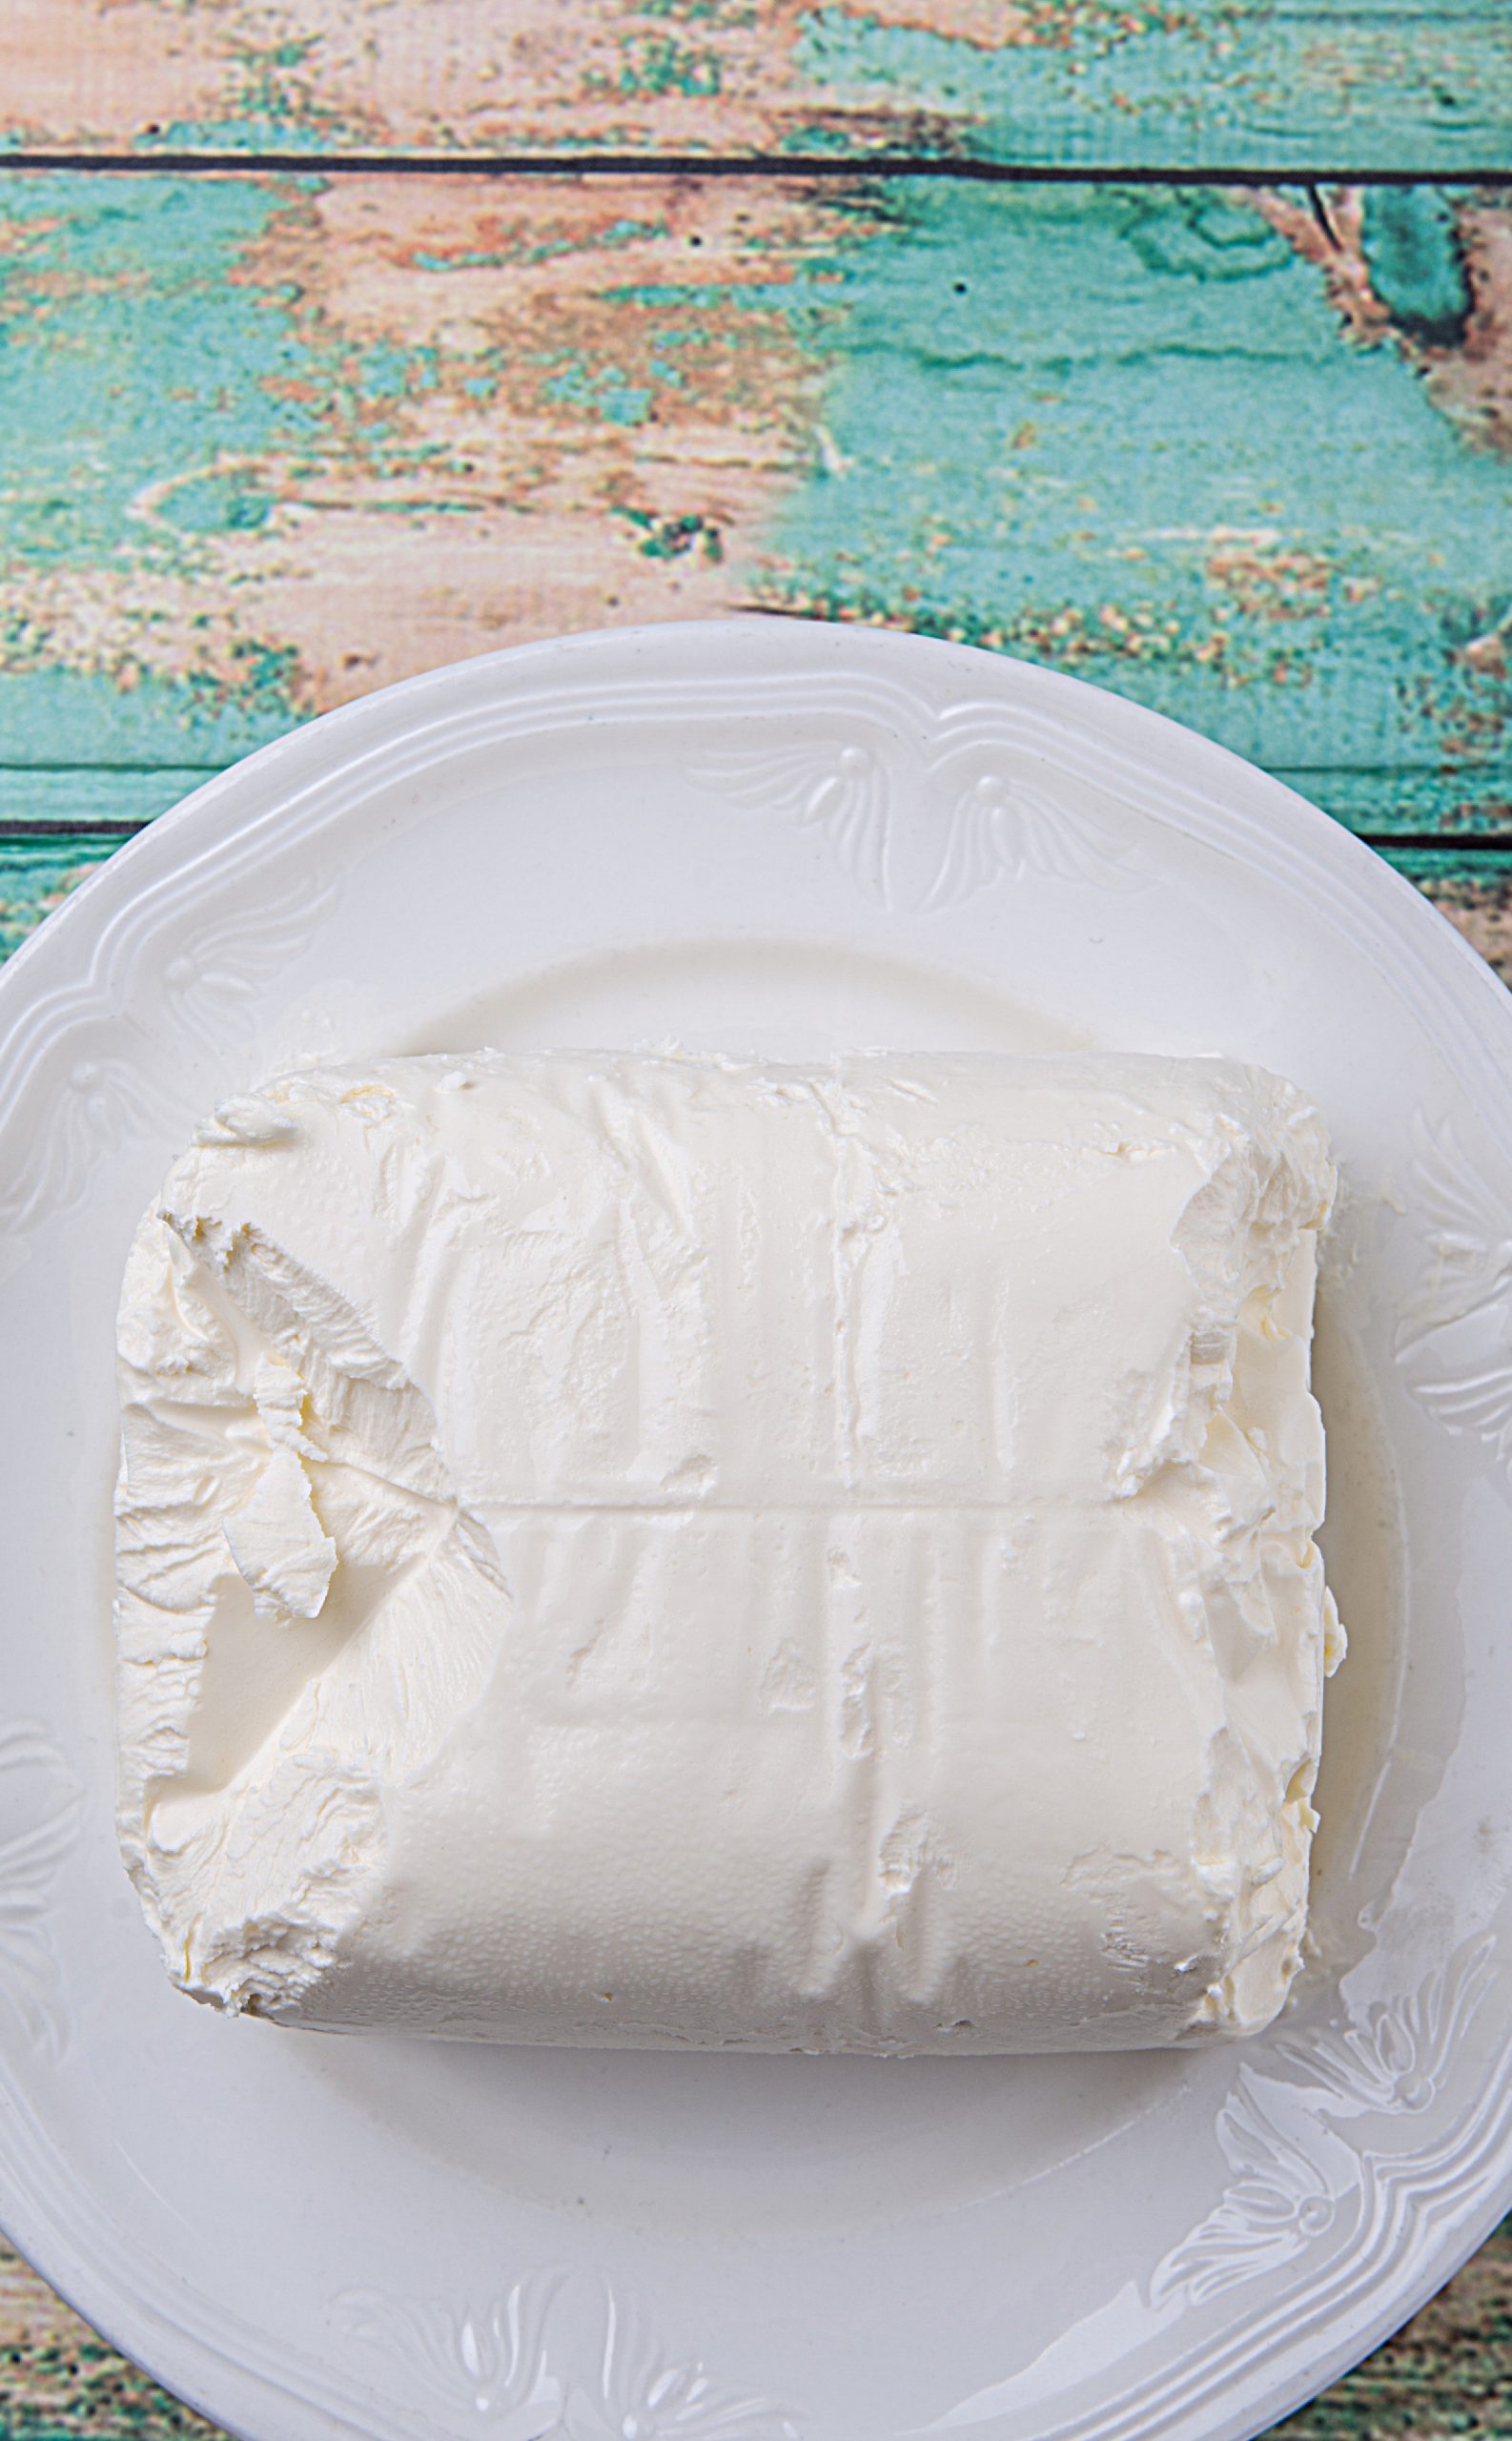 A white plate on a wooden table with cream cheese.